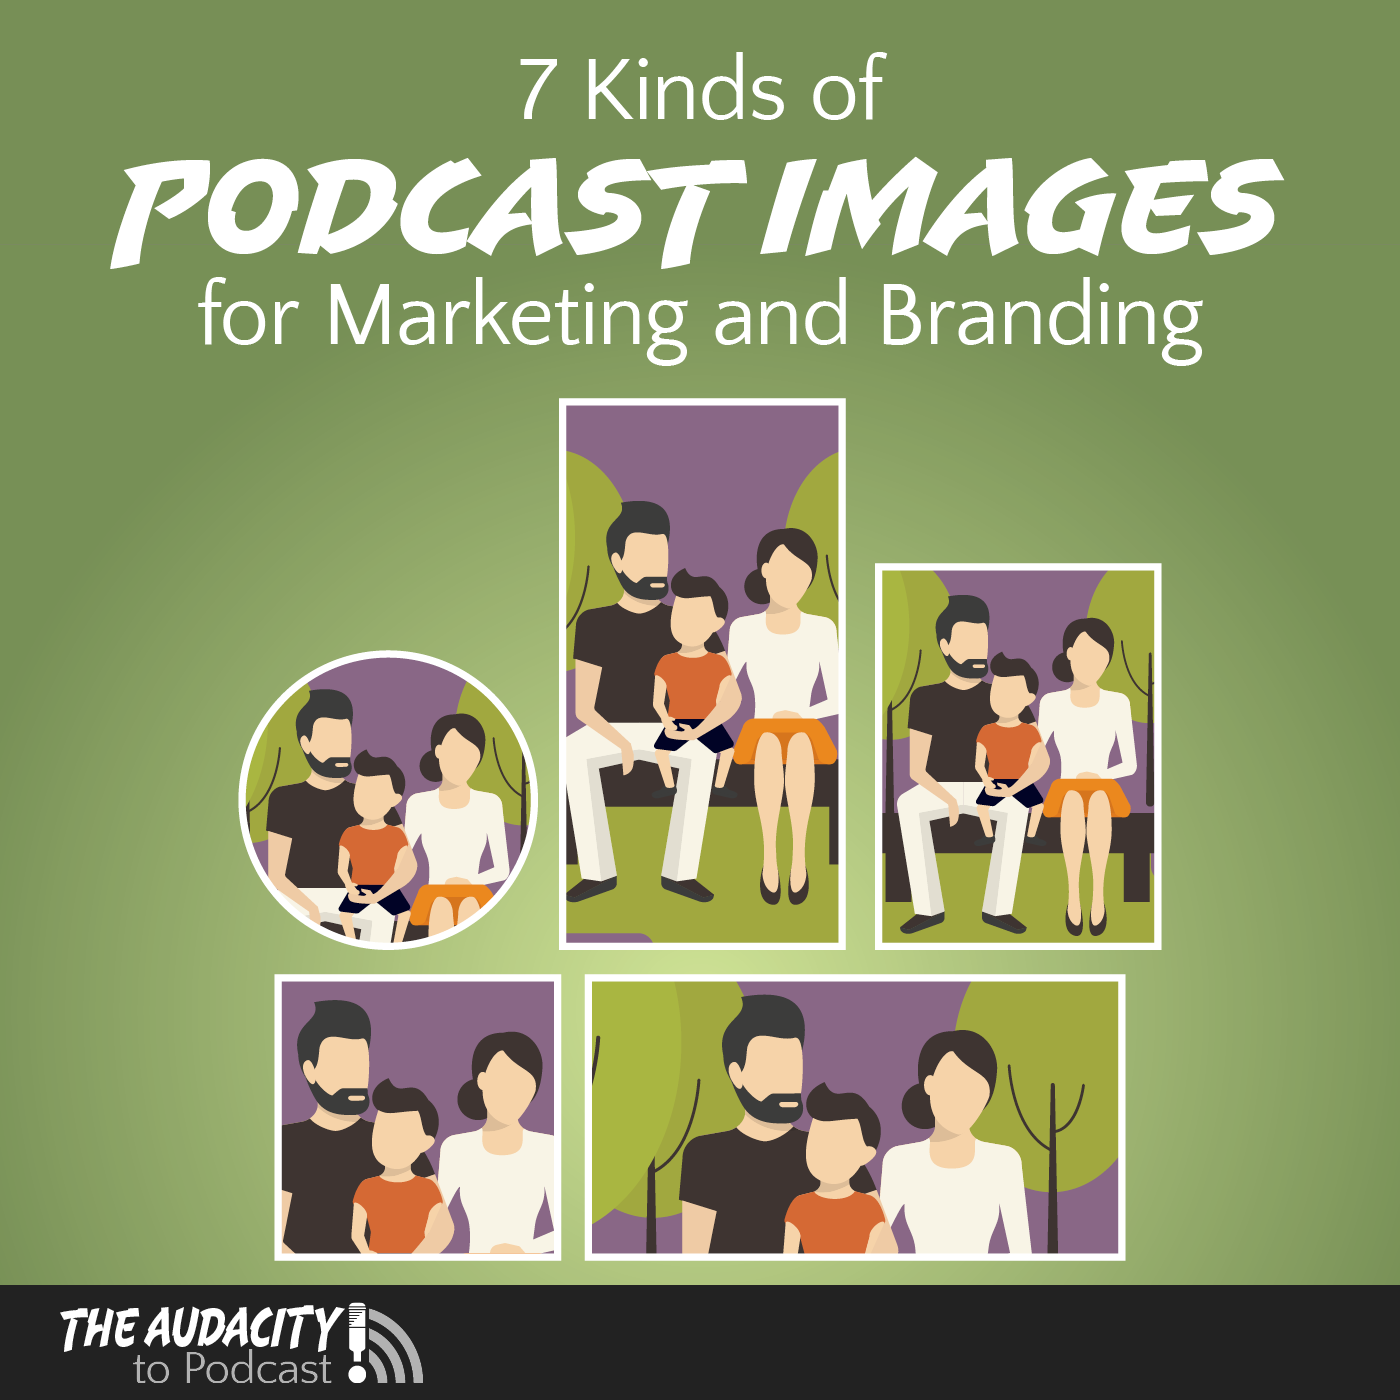 7 Kinds of Podcast Images for Marketing and Branding